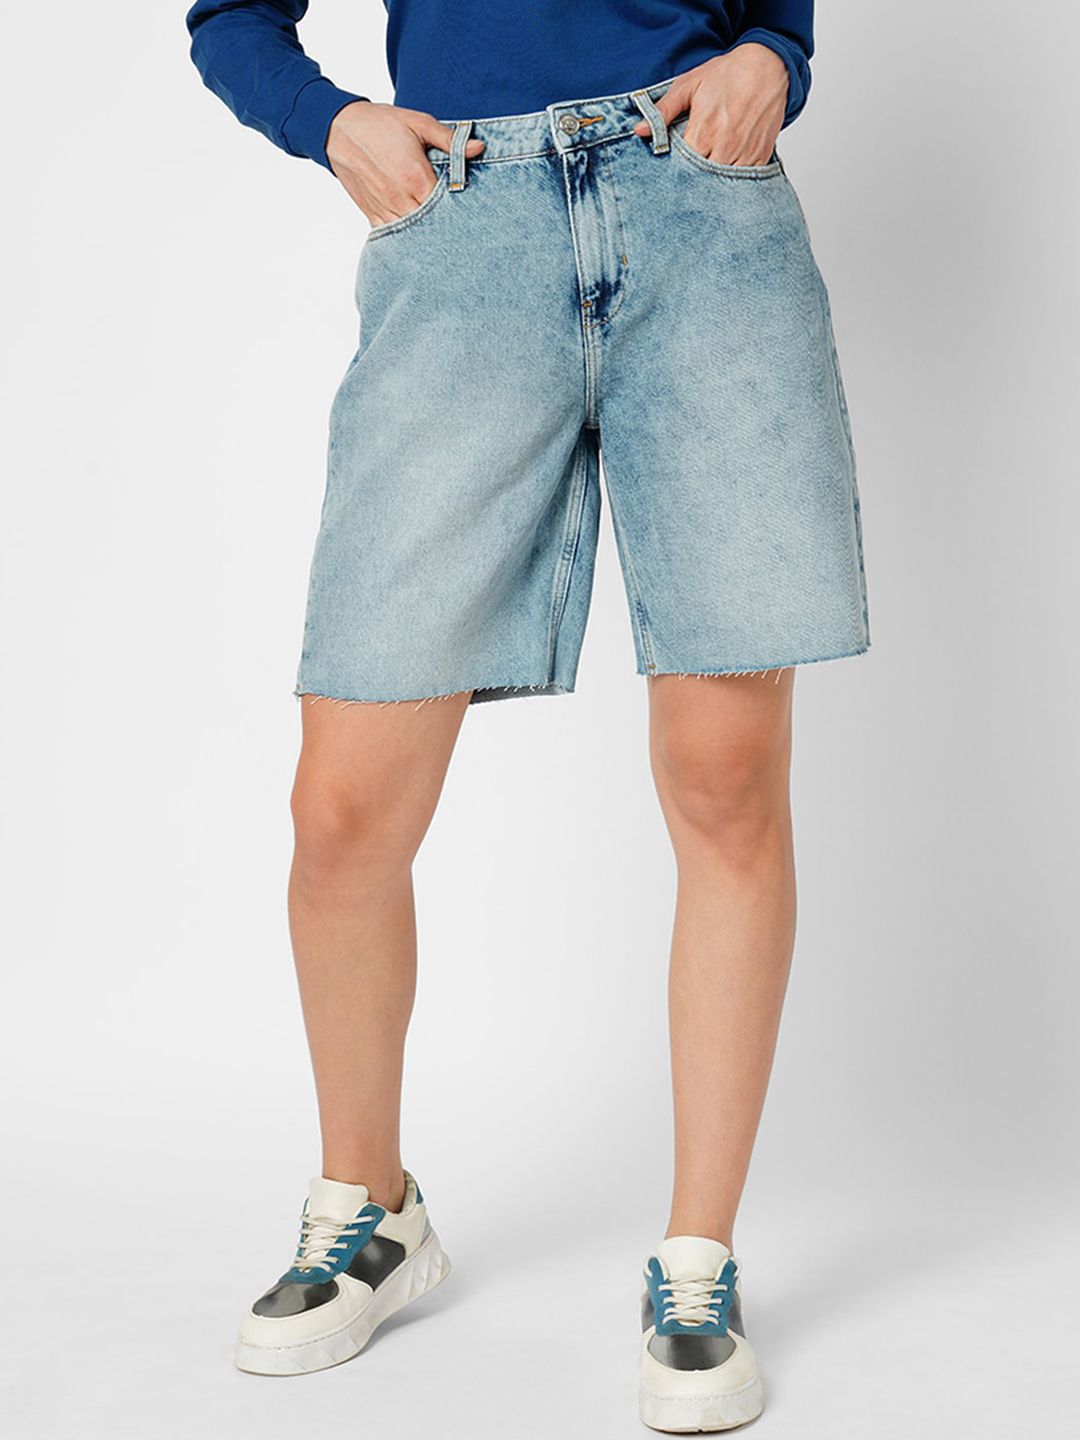 ONLY Women Washed High-Rise Pure Cotton Denim Shorts Price in India